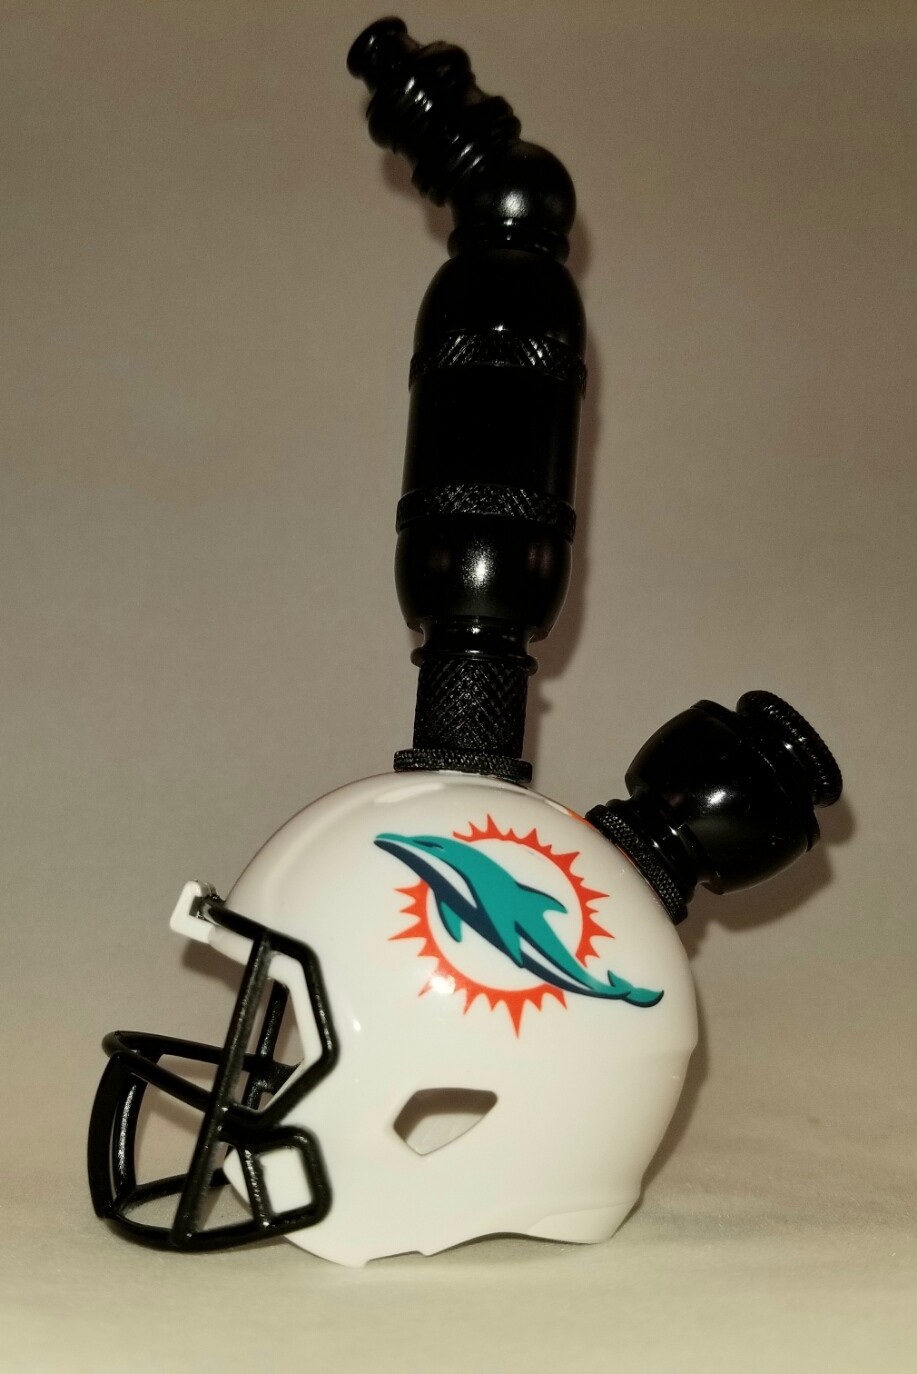 MIAMI DOLPHINS "BAD ASS" NFL FOOTBALL HELMET SMOKING PIPE Upright/Black Anodized